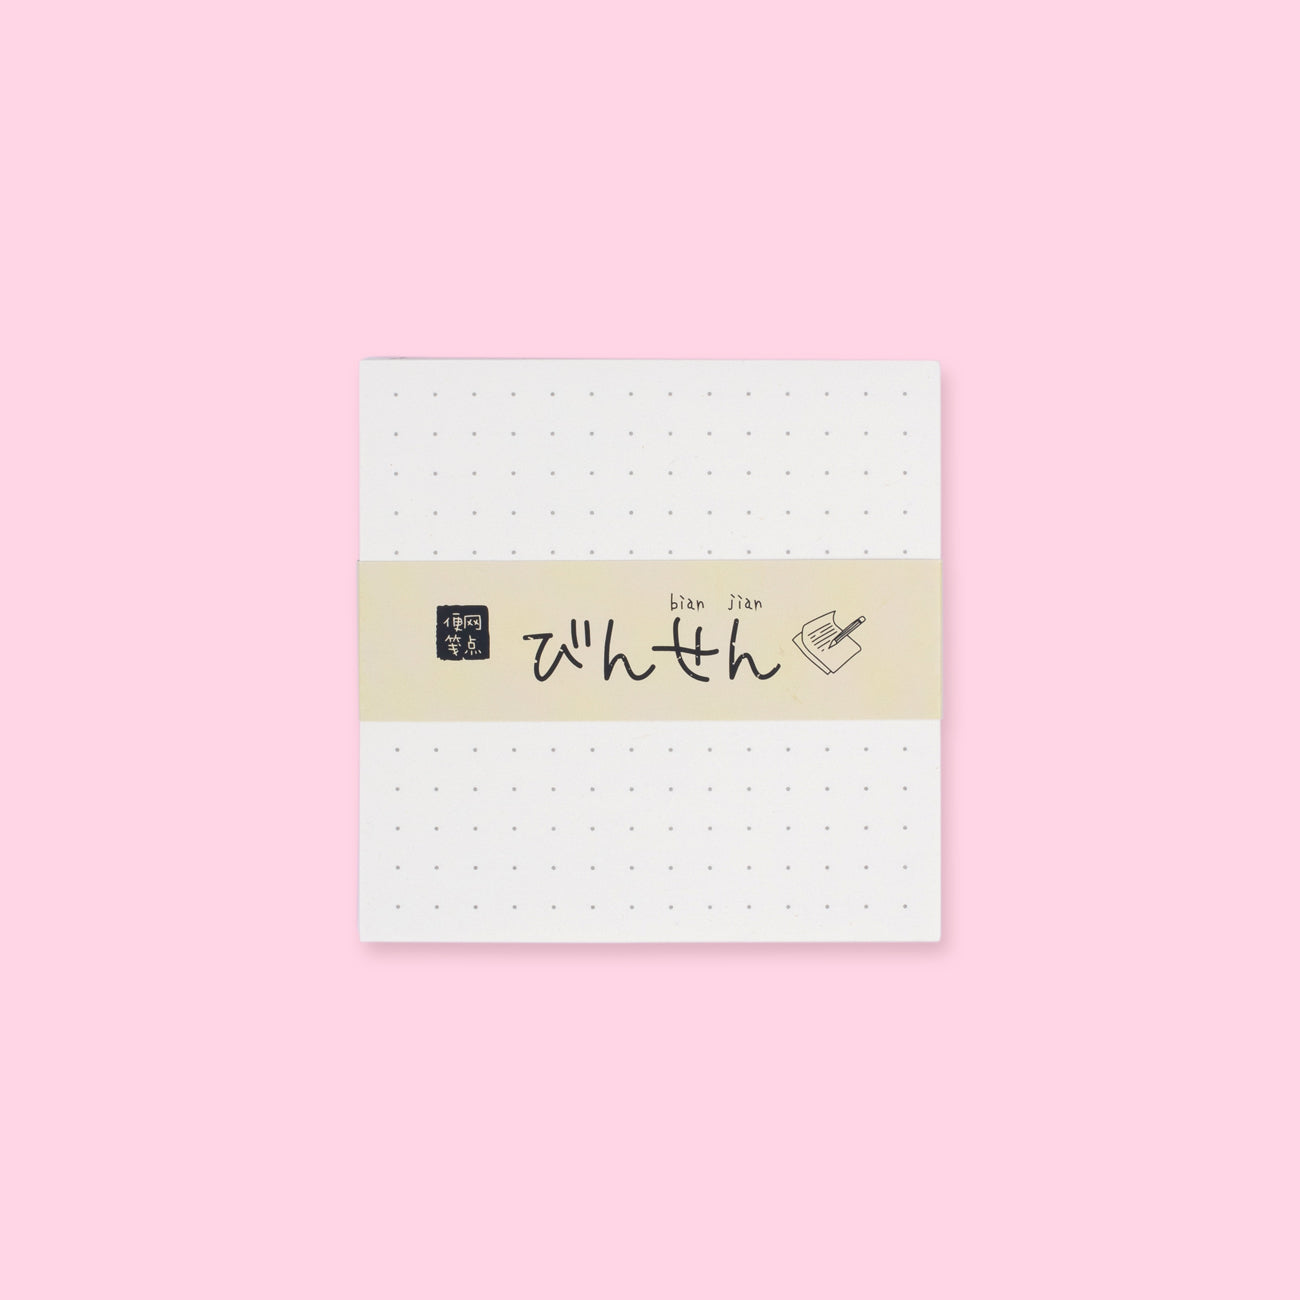 Memo Pad - Dotted - Stationery Pal